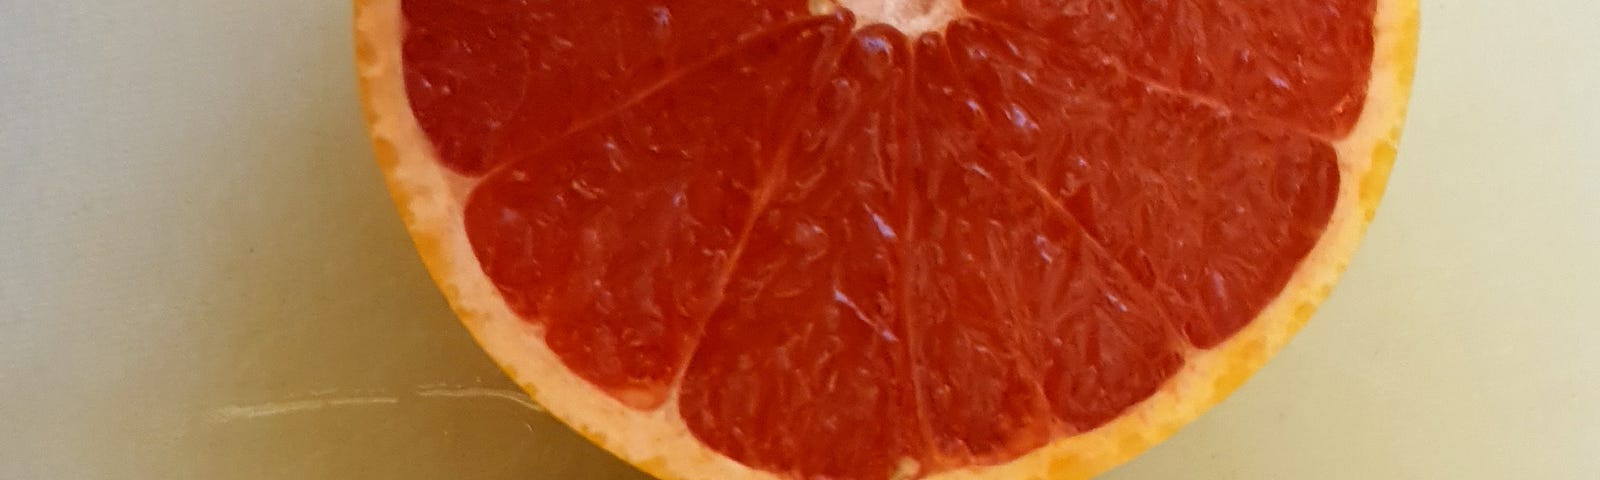 Half cut deep red grapefruit sitting face up with their 2 red halves showing | courtesy of author